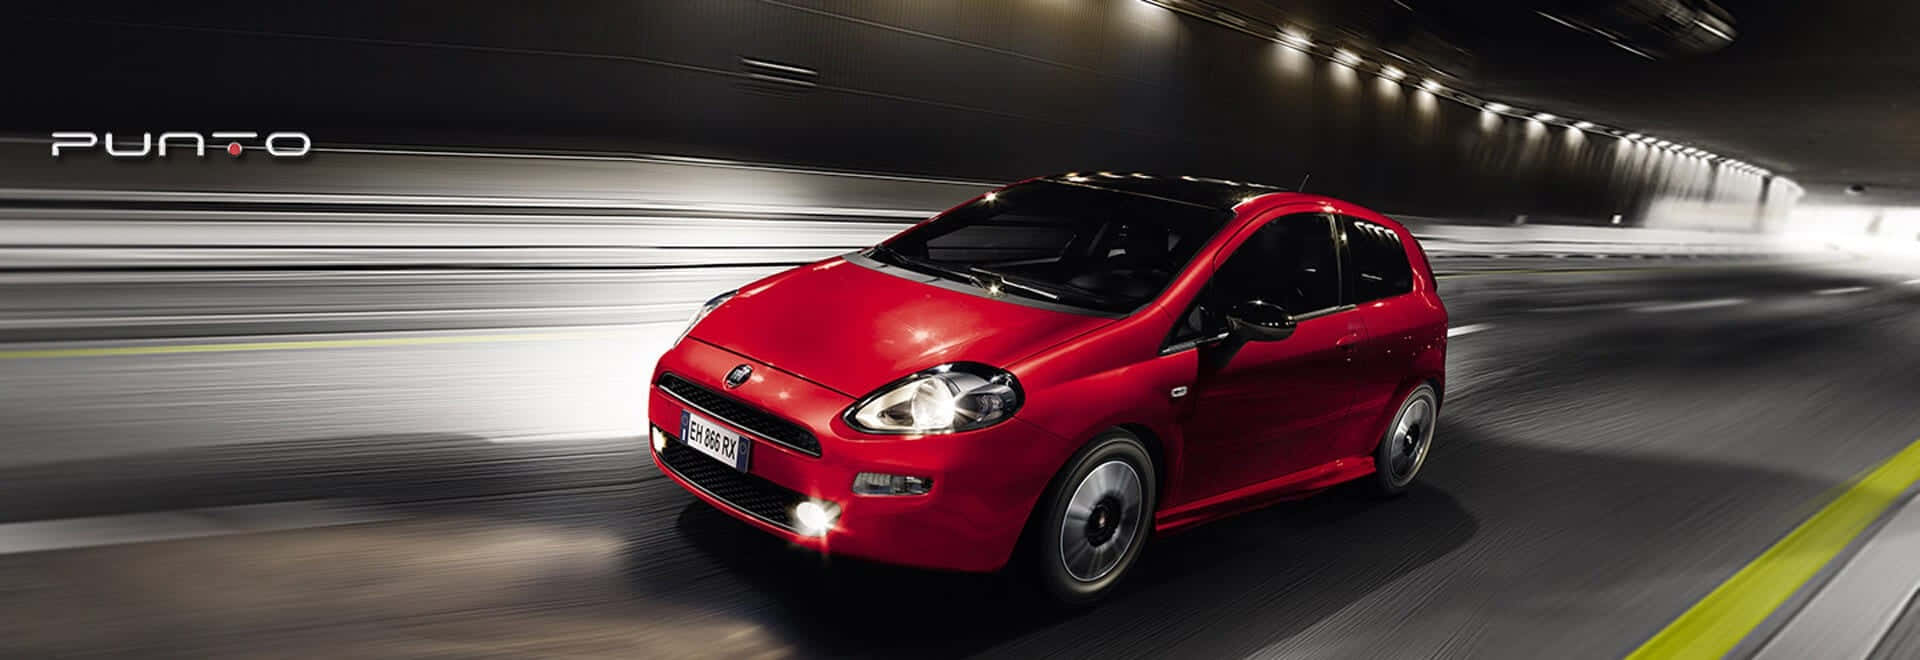 Sleek and Stylish Fiat Punto on the Road Wallpaper